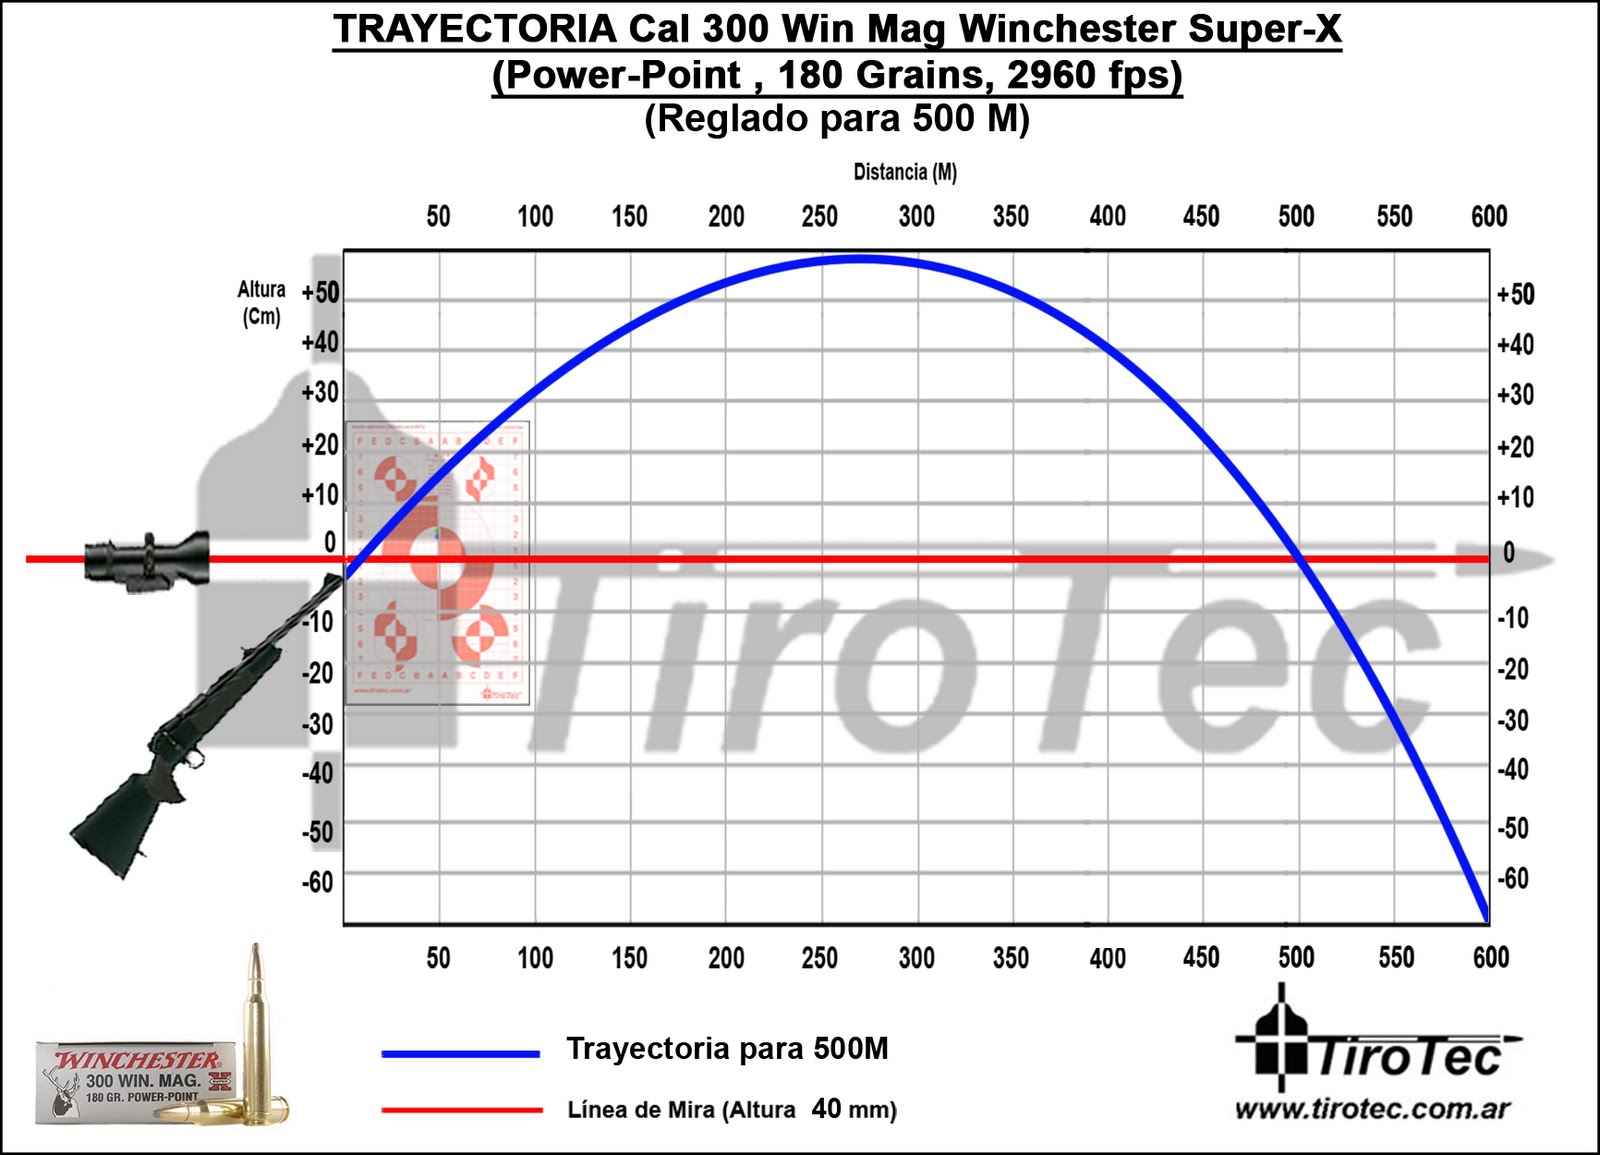 trajectory chart for 300 win mag tirotec calibre 300 win mag winchester sup...